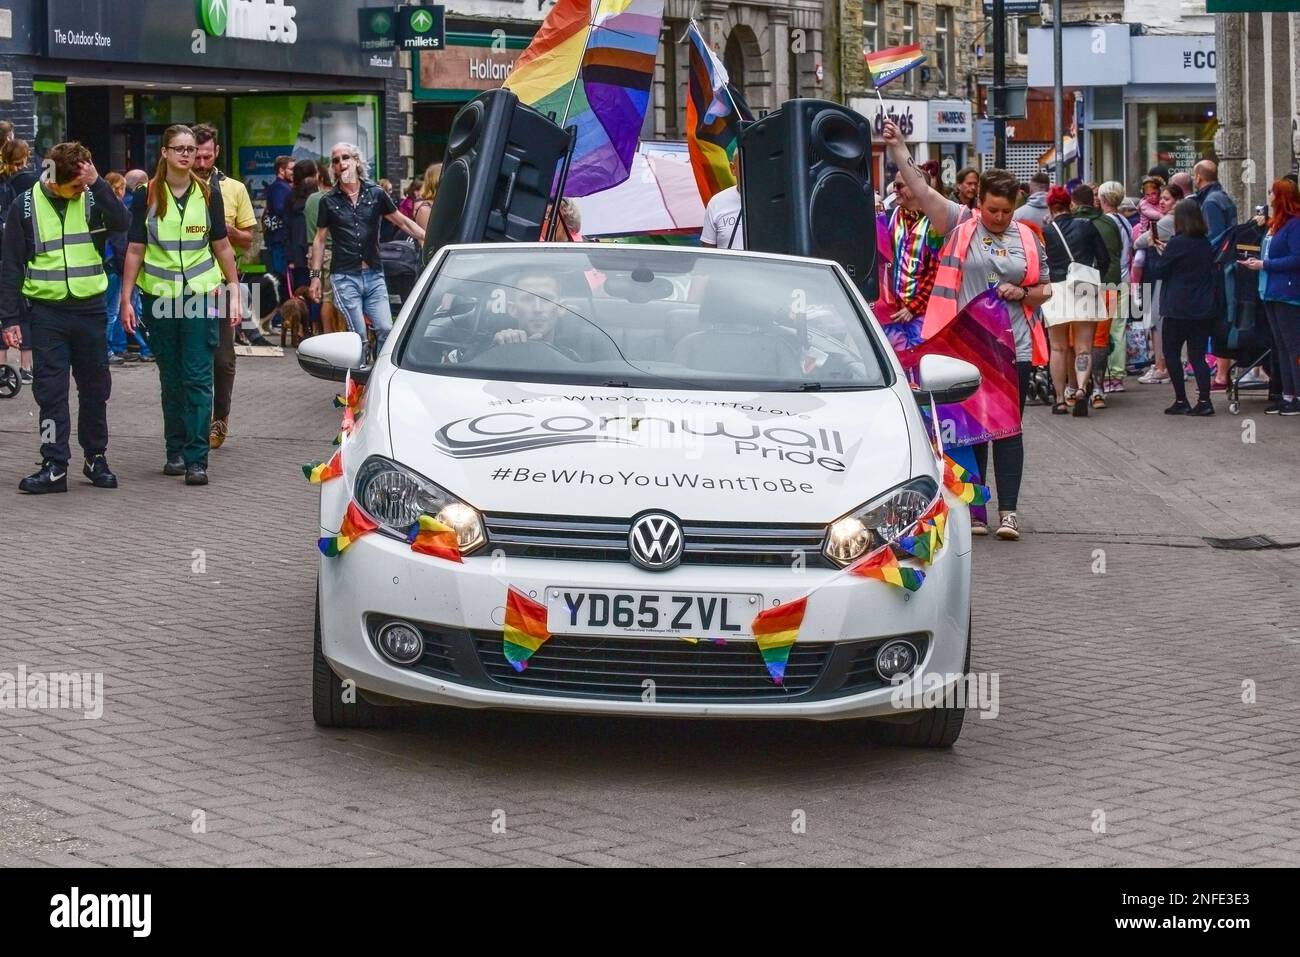 A car leading the vibrant colourful Cornwall Prides Pride parade in Newquay Town centre in the UK. Stock Photo